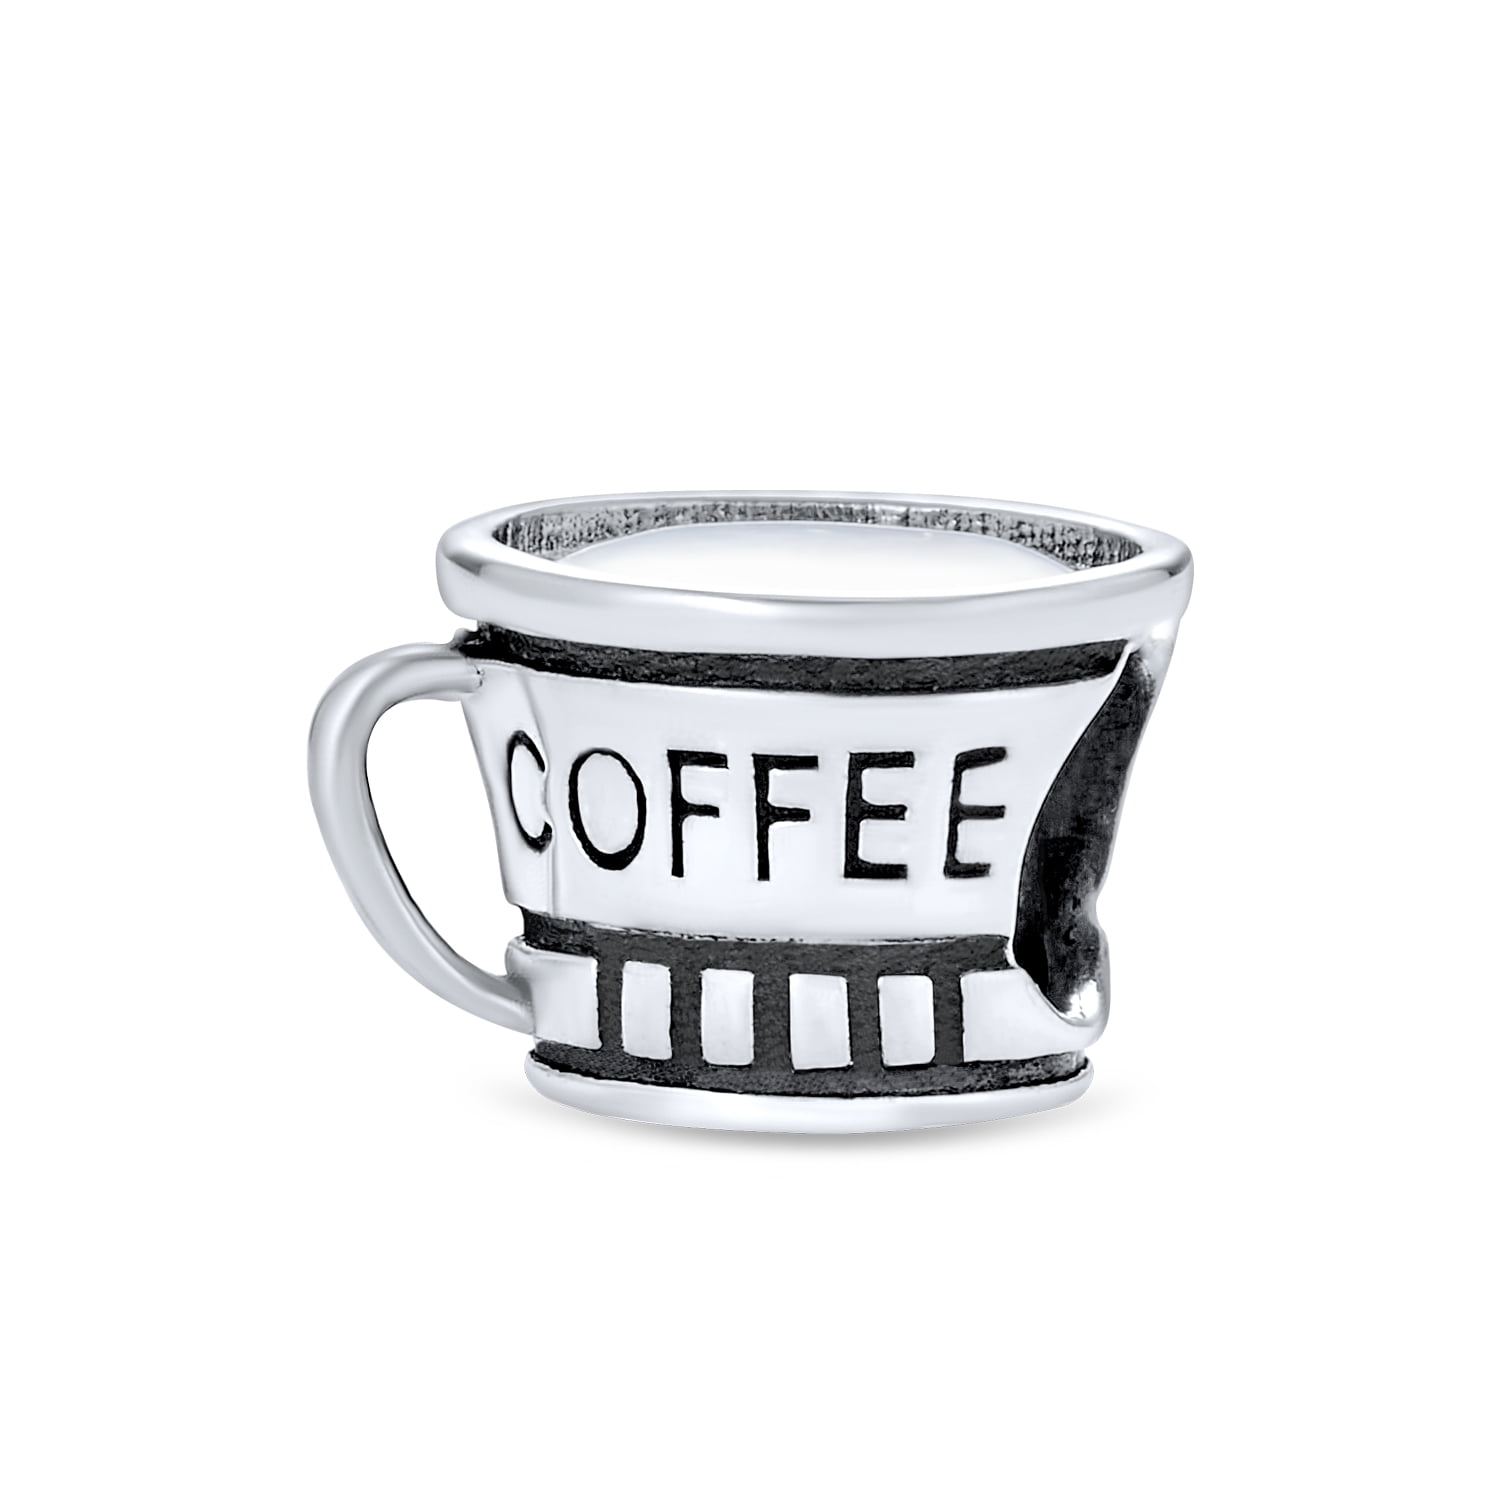 Coffee Cup Heart Red Wine Glass Cup Charms 925 Sterling Silver I Love Coffee Cup Bottle Charms Fits European Bracelet 